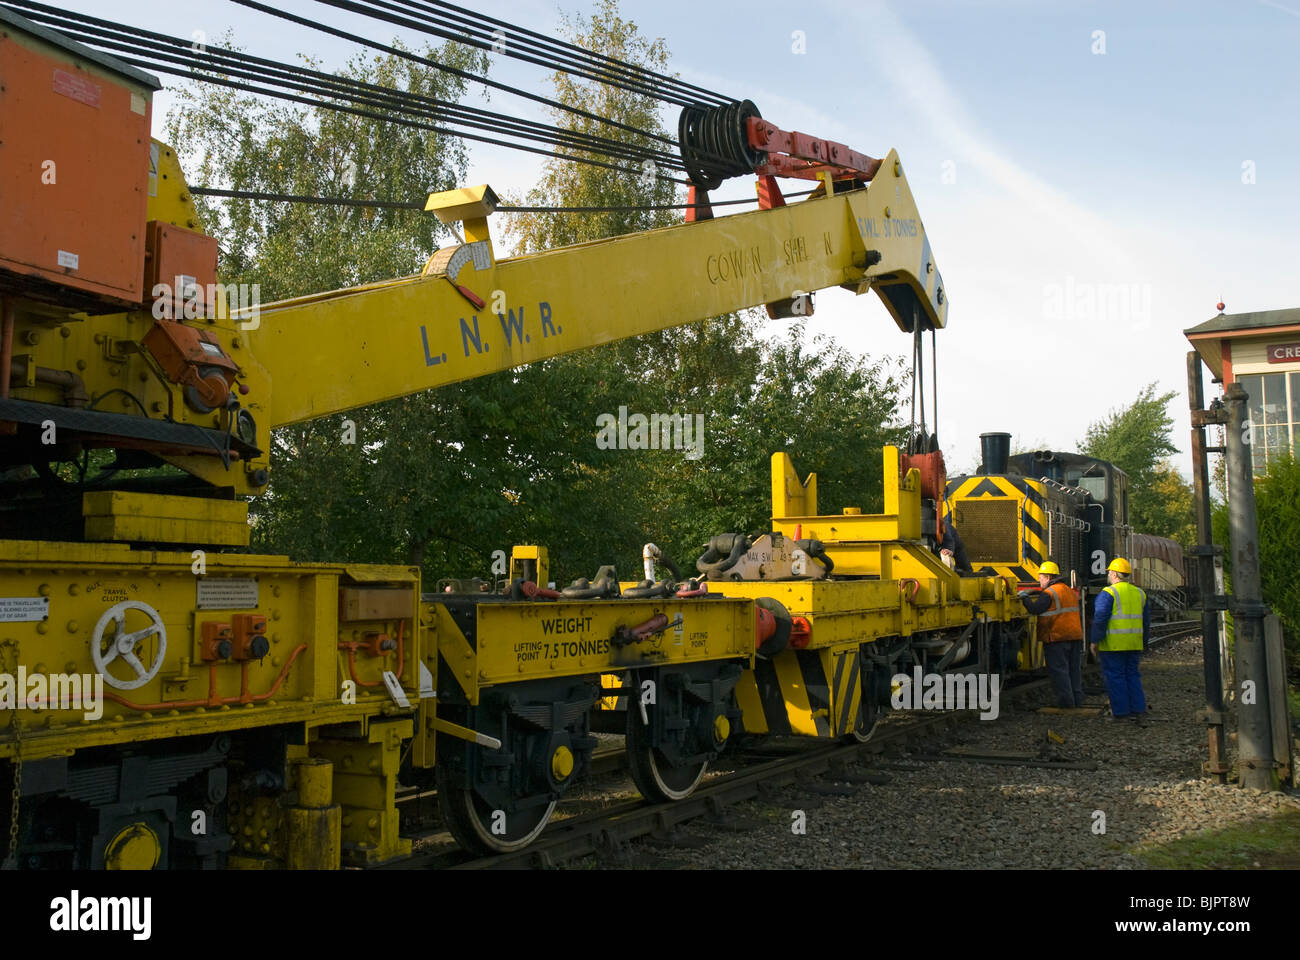 Cowans Sheldon 50 tonne strut jib rail crane at Crewe, Cheshire, UK.  Stowing the jib on to the relieving bogey. Stock Photo